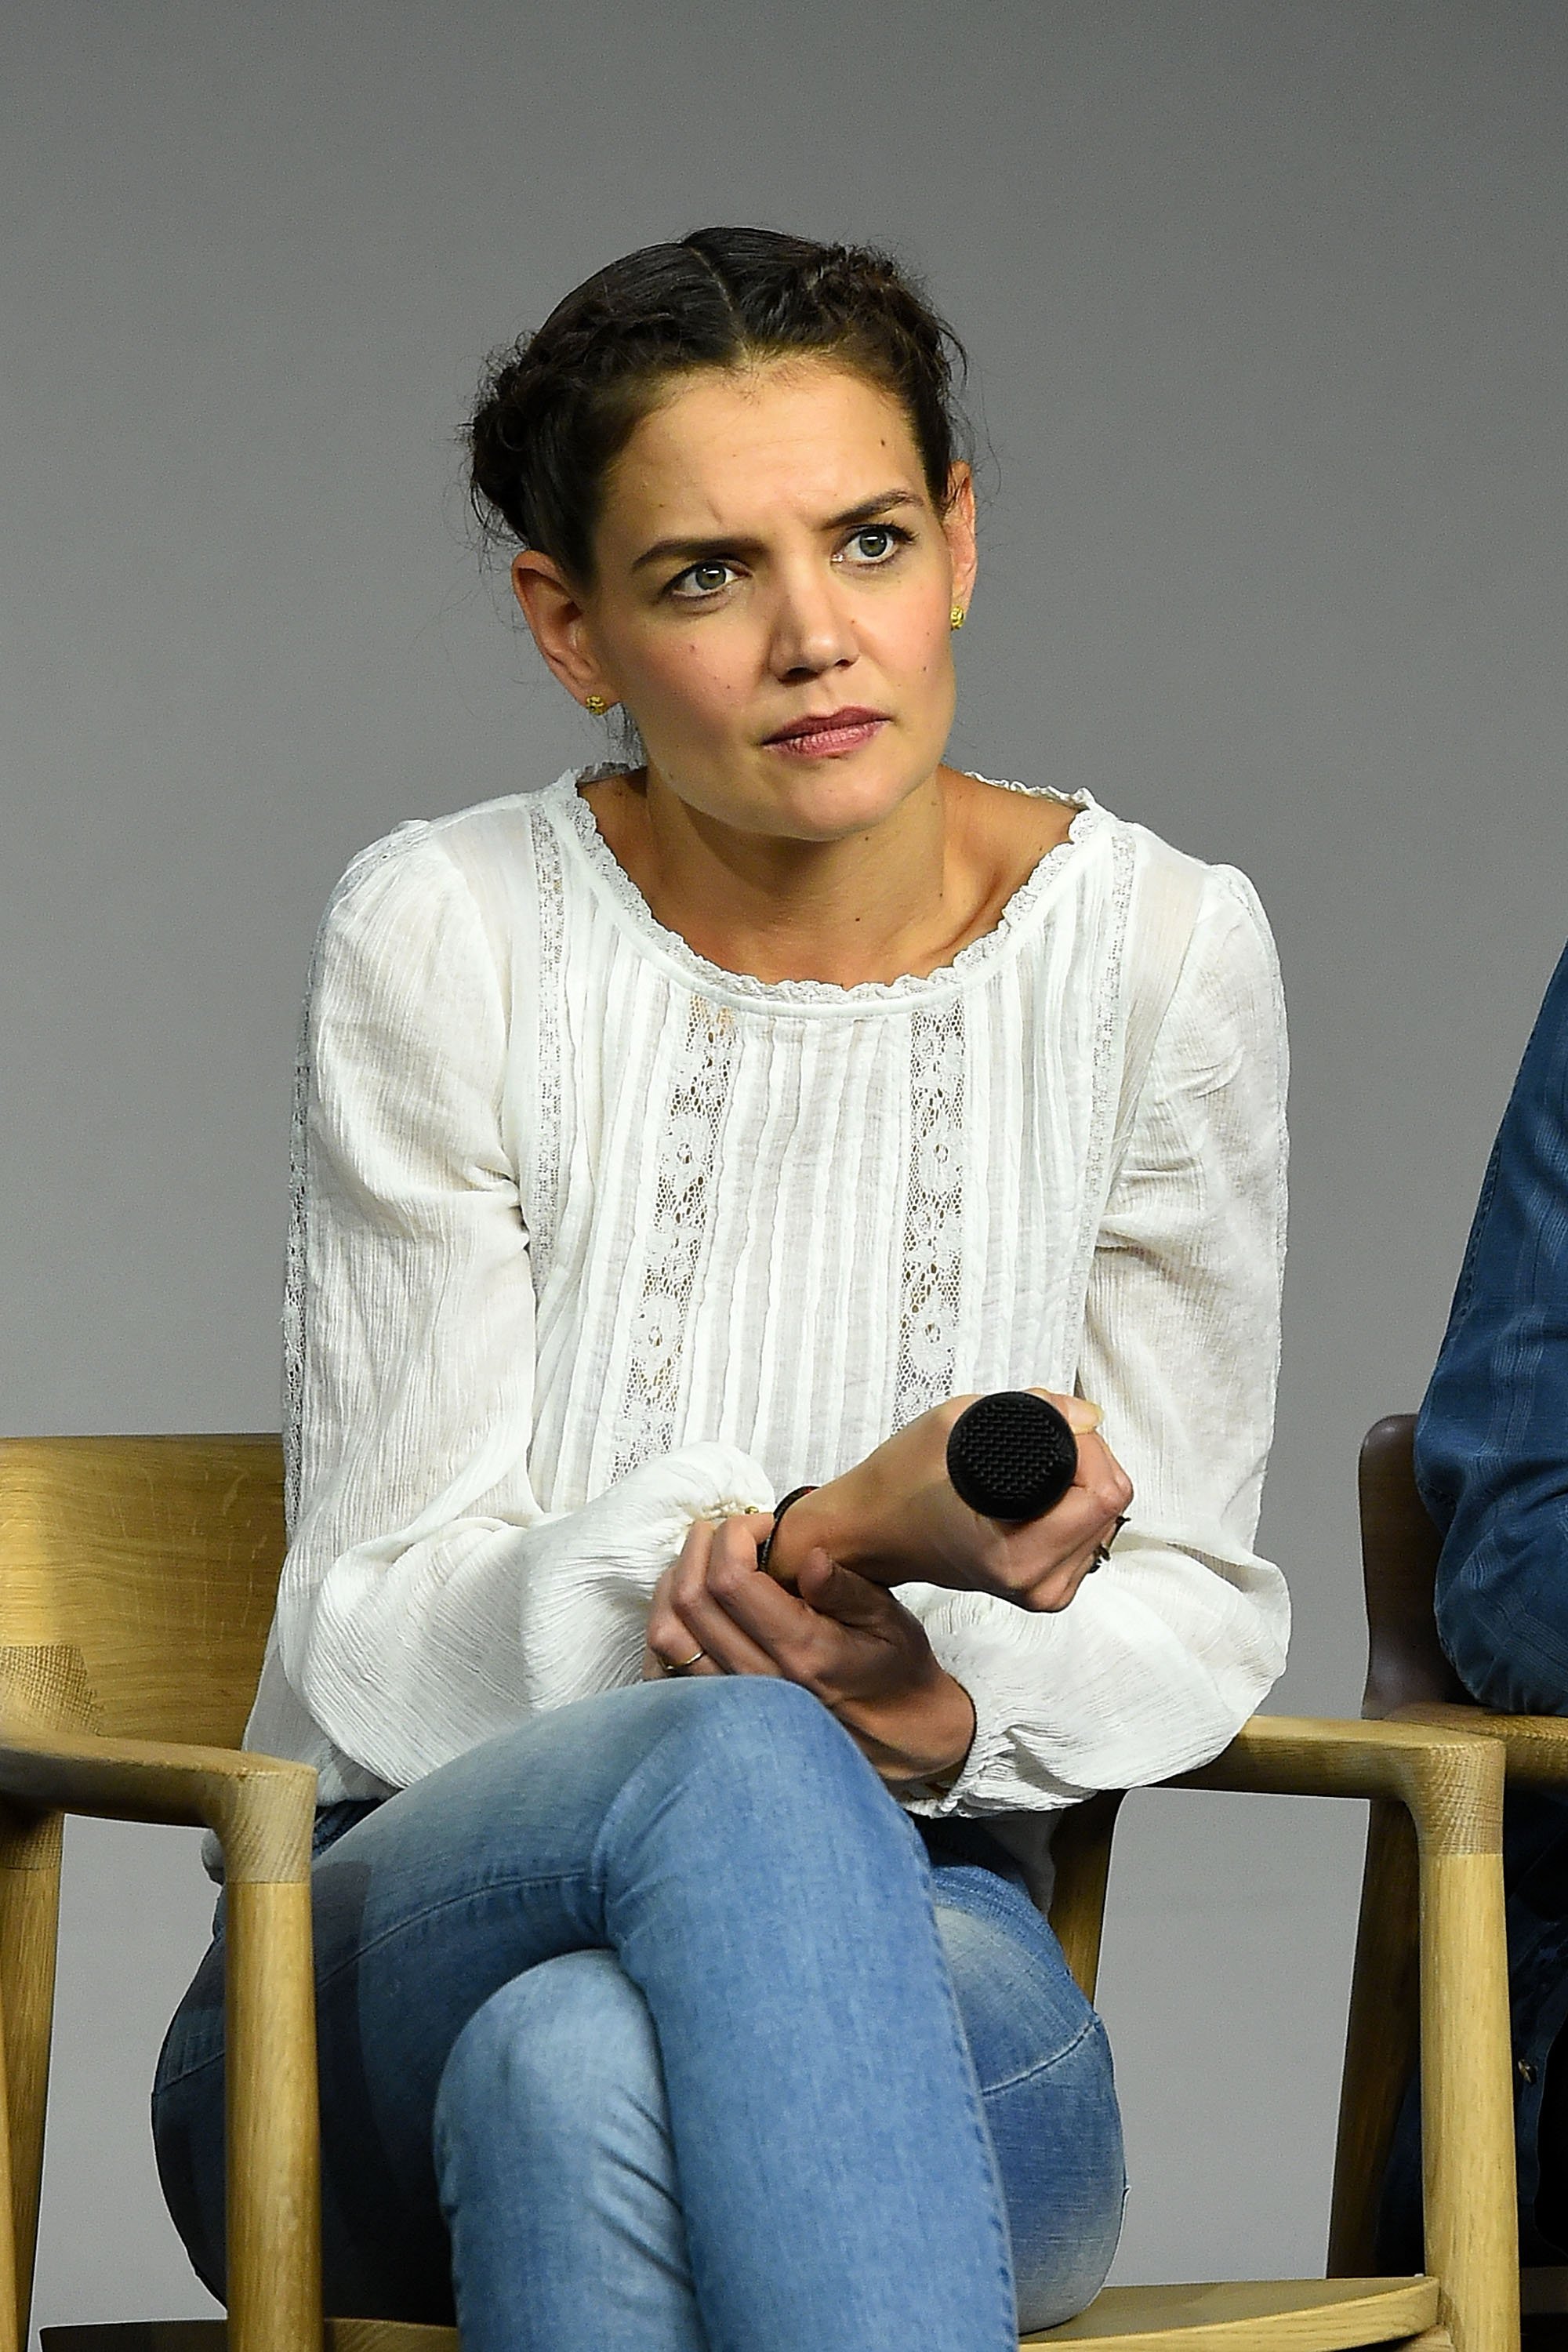 Katie Holmes attends Apple Store Soho's "Meet the Filmmaker" in New York City on February 8, 2016 | Photo: Getty Images